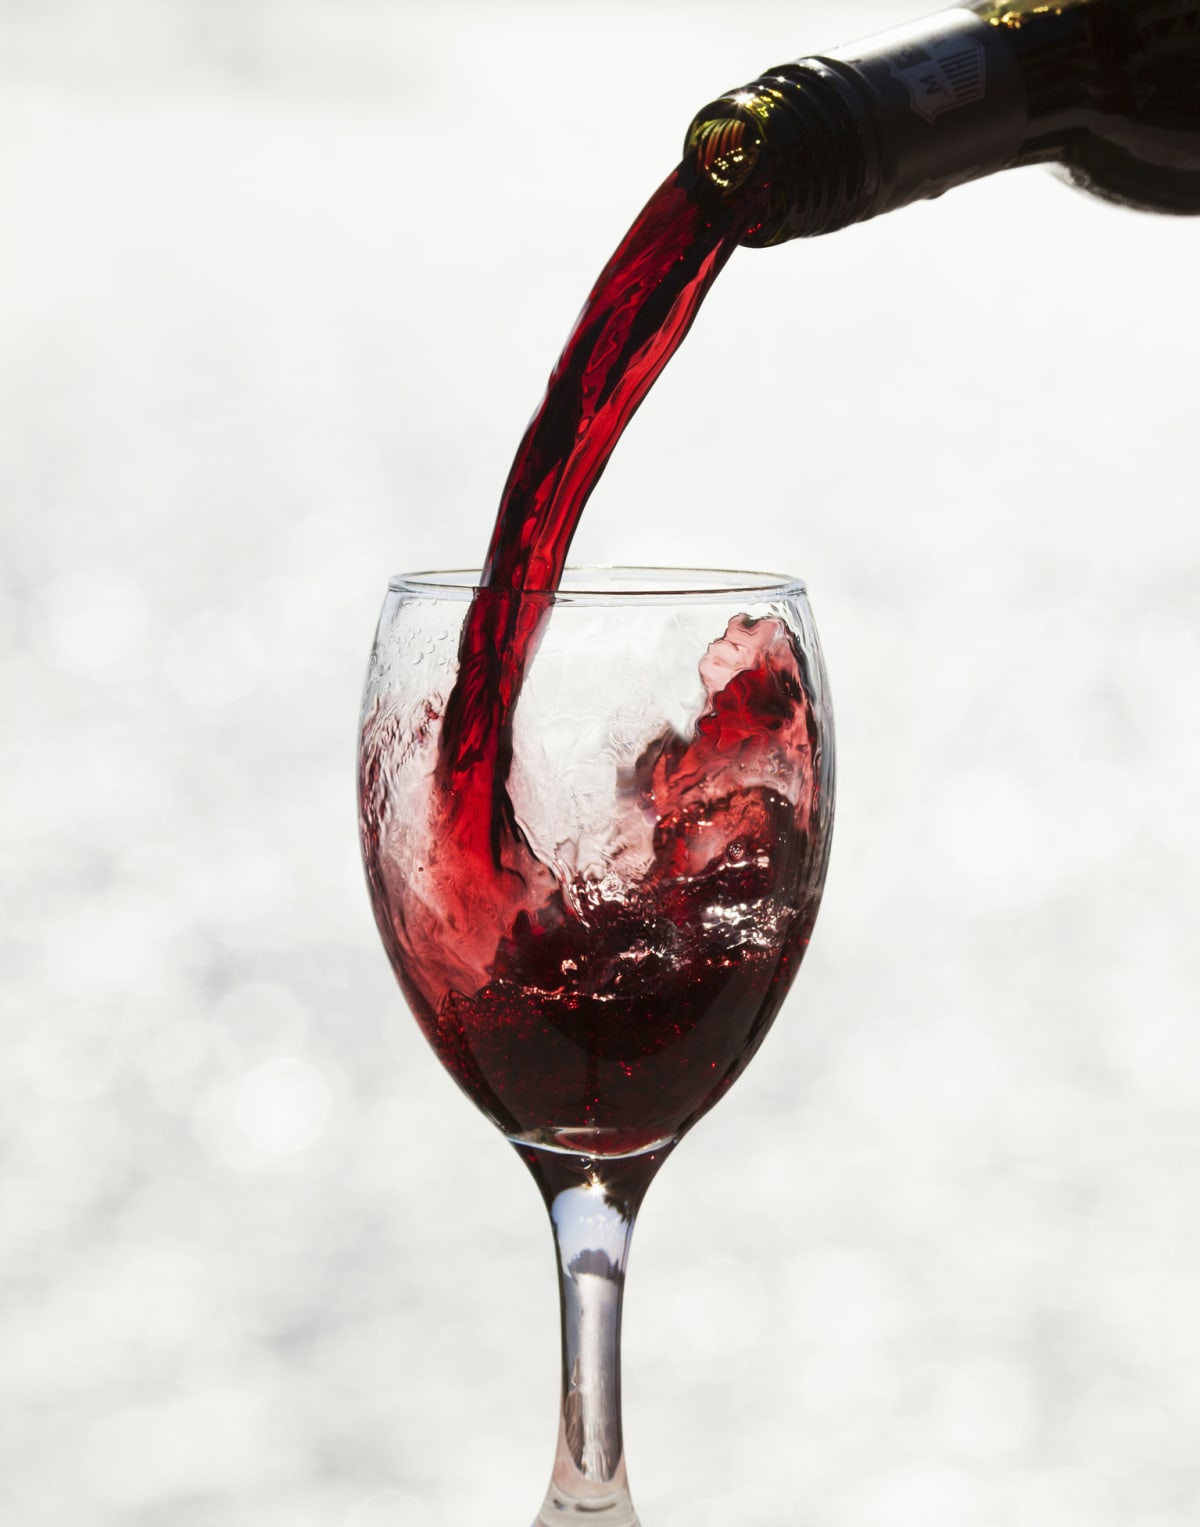 Red wine pouring into glass.